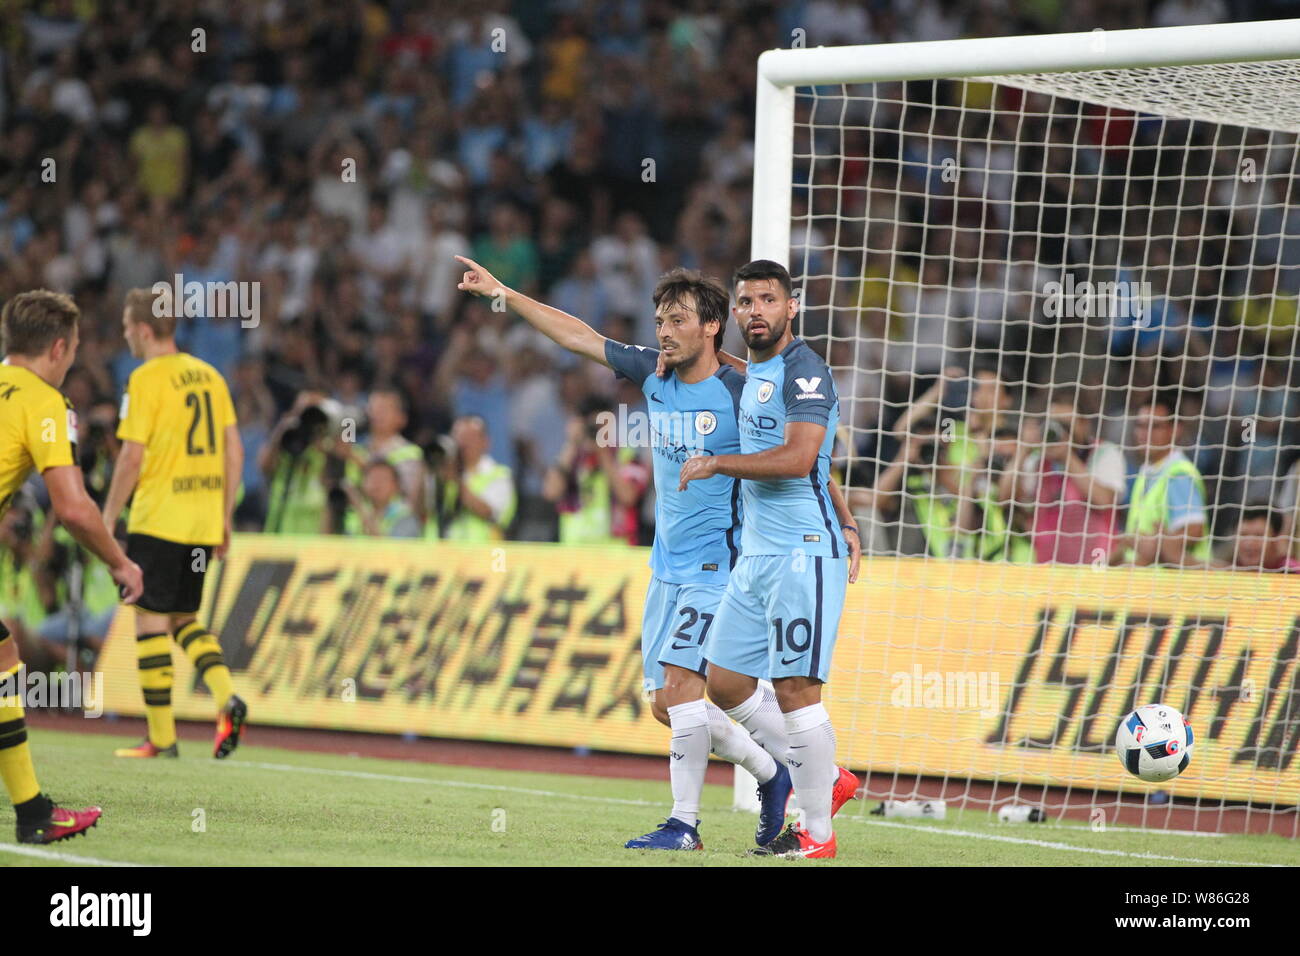 Sergio Aguero of Manchester City, right, celebrates with teammate David Silva after scoring a goal against Borussia Dortmund during the Shenzhen match Stock Photo